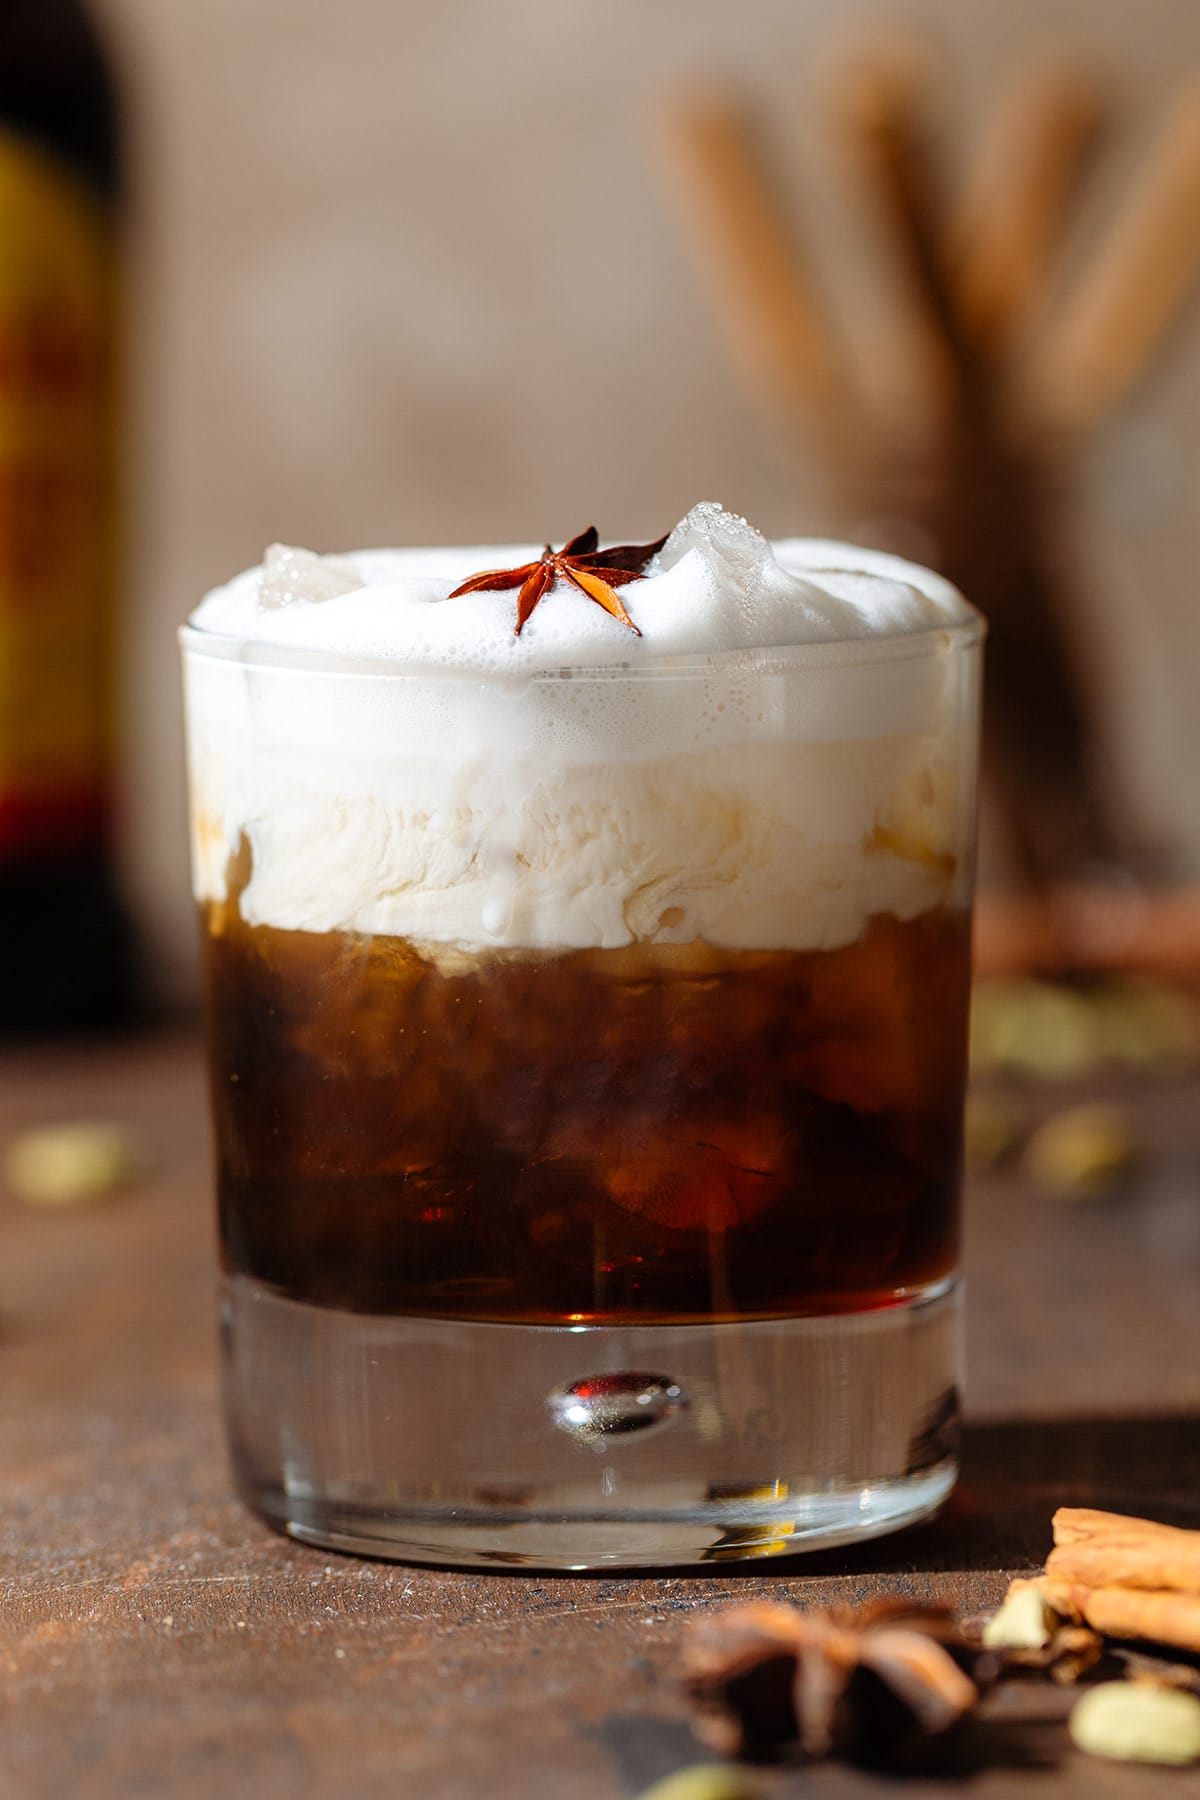 White Russian cocktail in a double old fashioned glass garnished with star anise on a wooden backdrop.